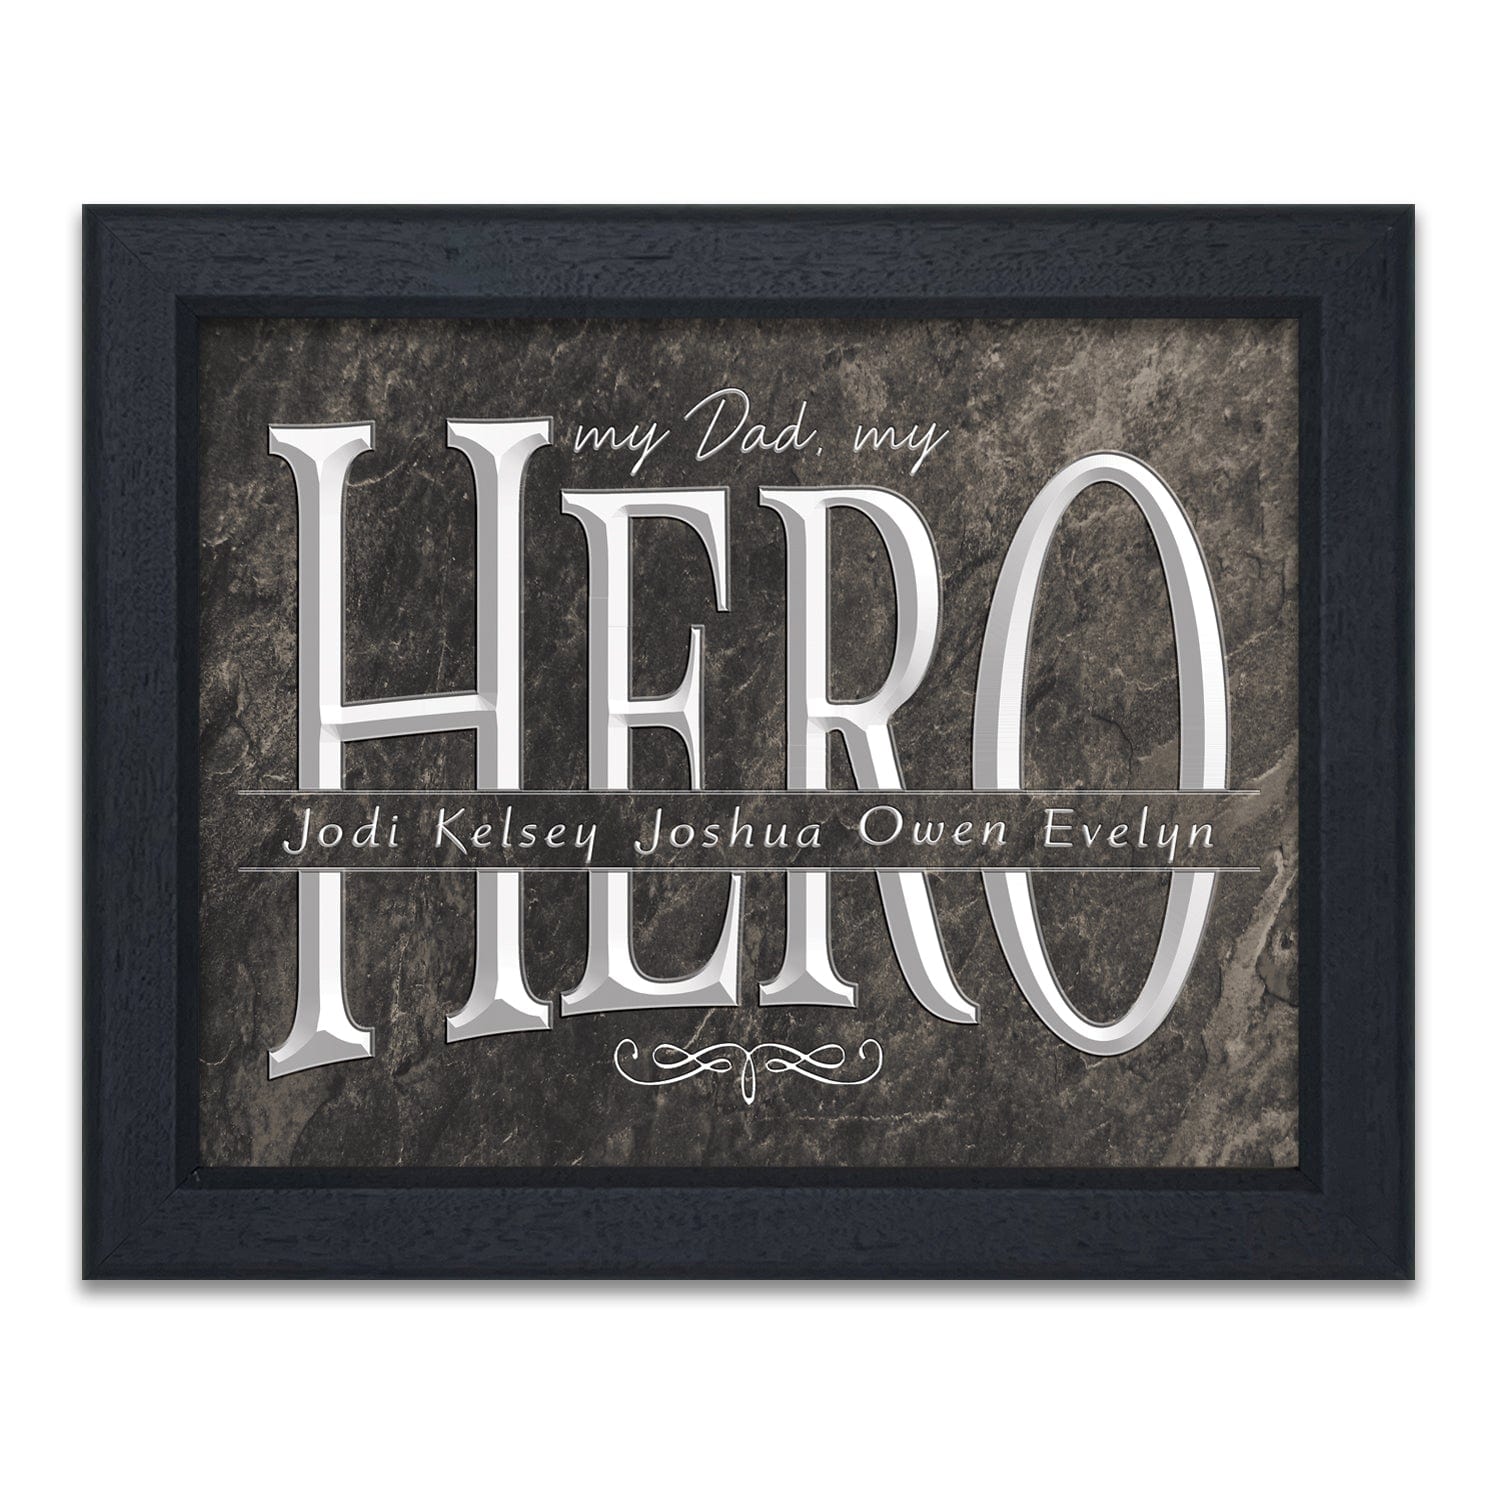 My Dad My Hero Personalized Gift for Dad from Personal Prints